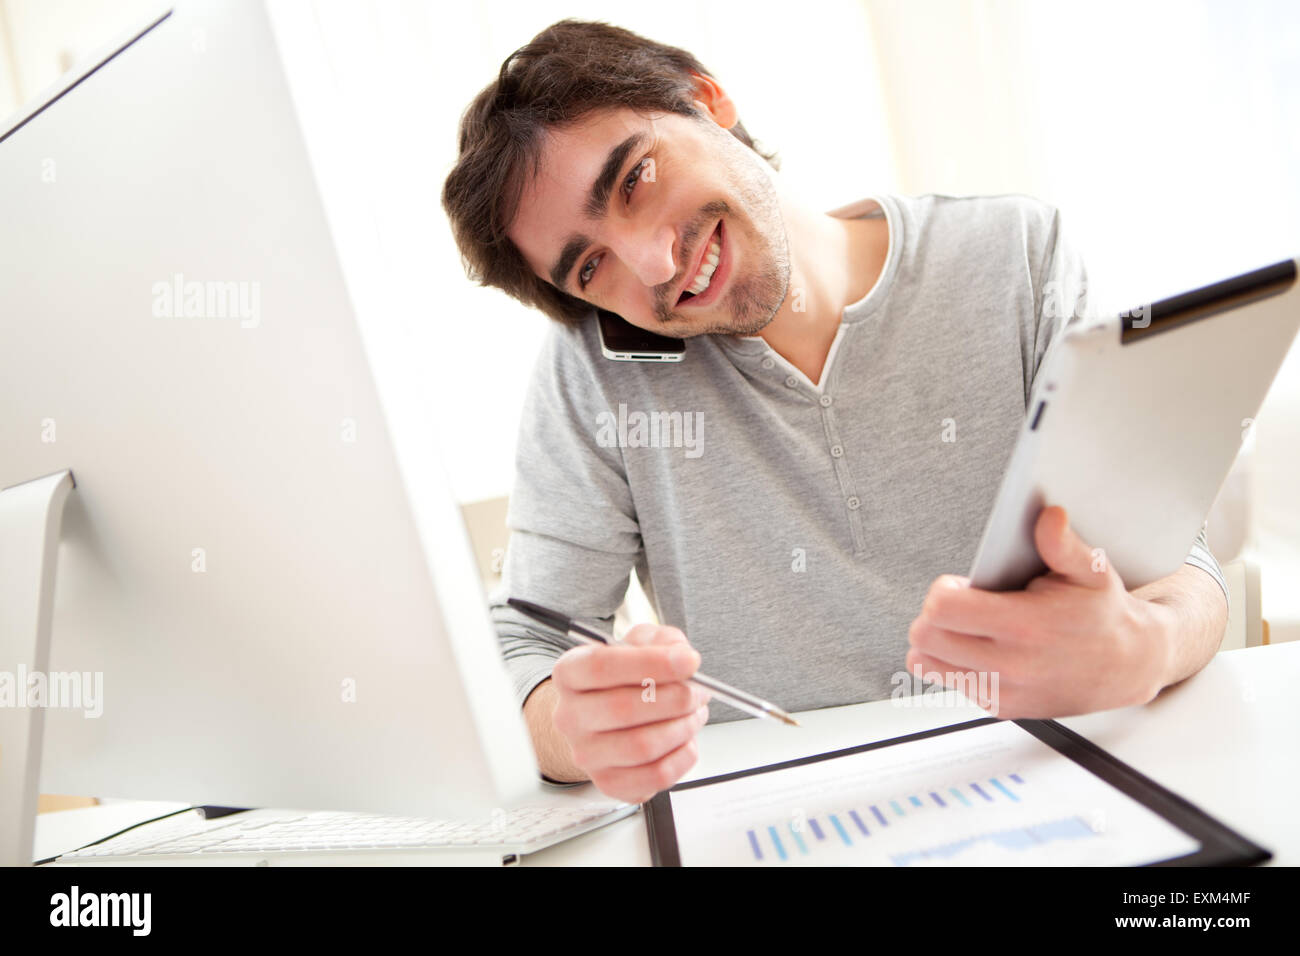 View of a young busy men at the office using tablet and smartphone Stock Photo